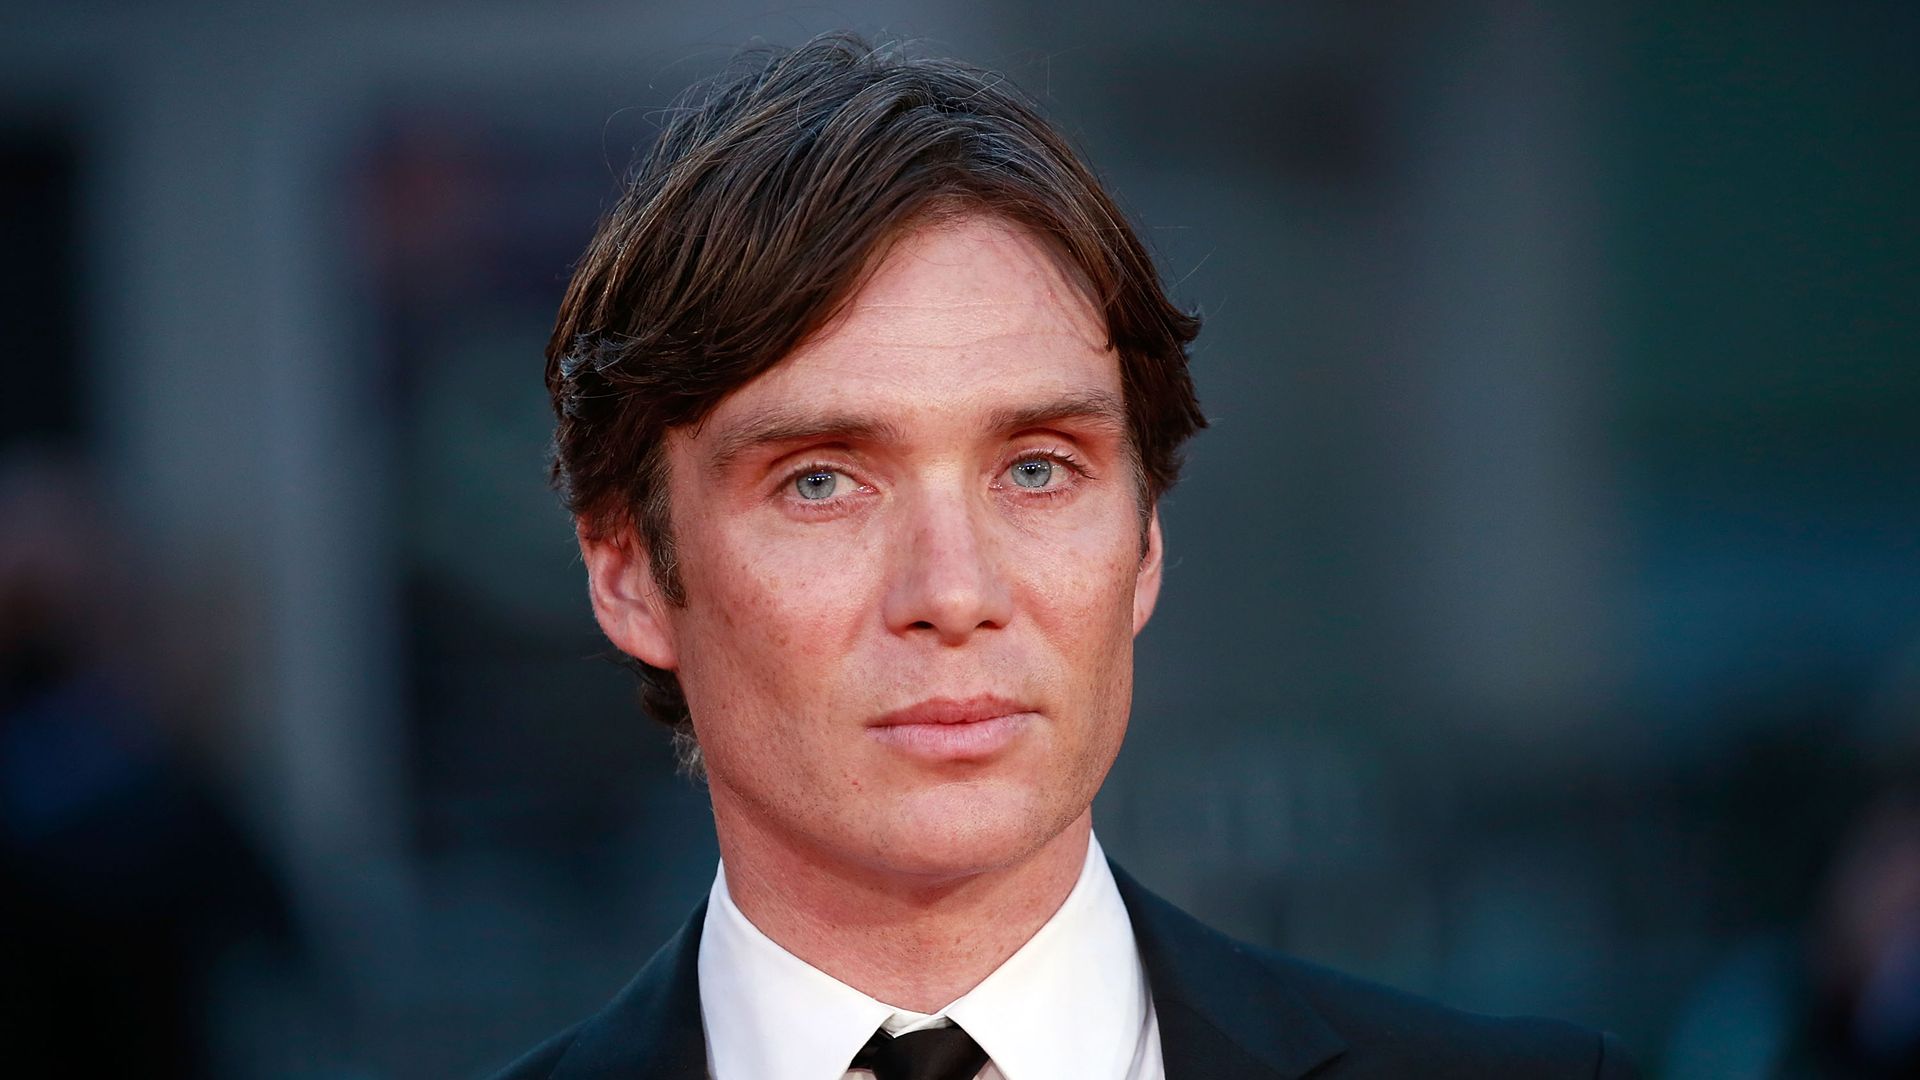 Cillian Murphy attends the 'Free Fire' Closing Night Gala screening during the 60th BFI London Film Festival at Odeon Leicester Square on October 16, 2016 in London, England.